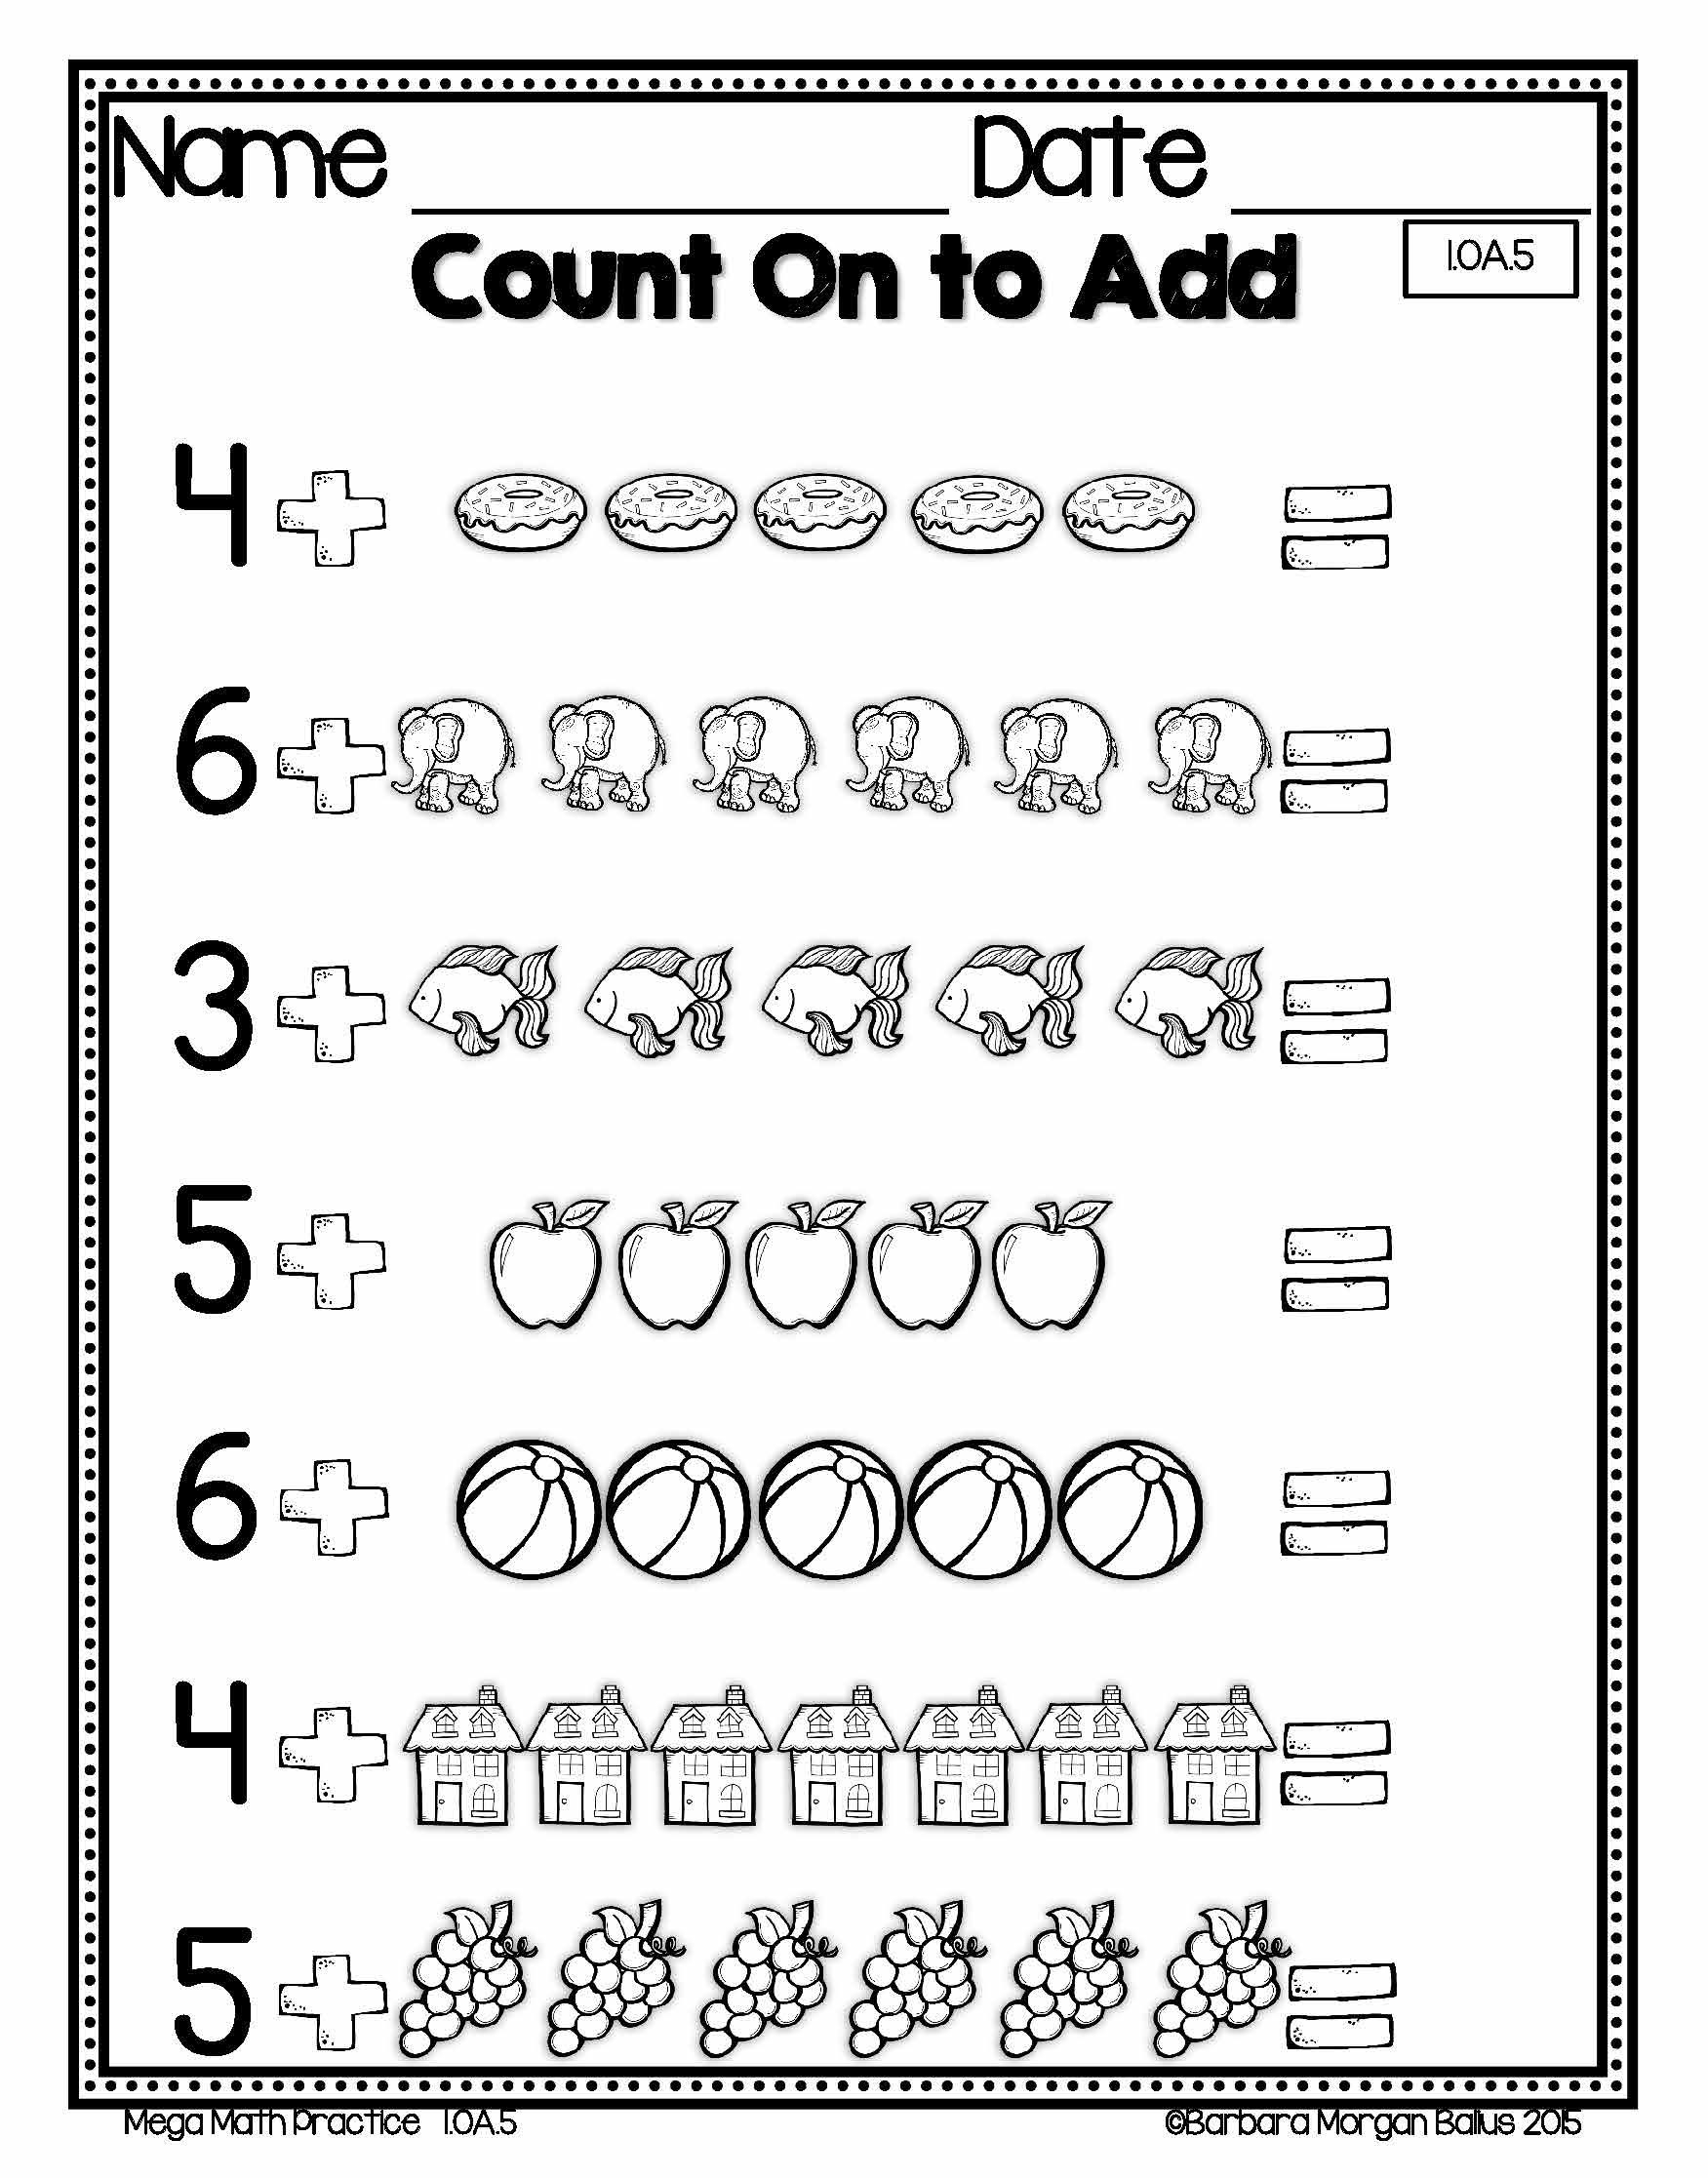 Counting Practice For First Grade Deborah Ibarra 39 s 1st Grade Math